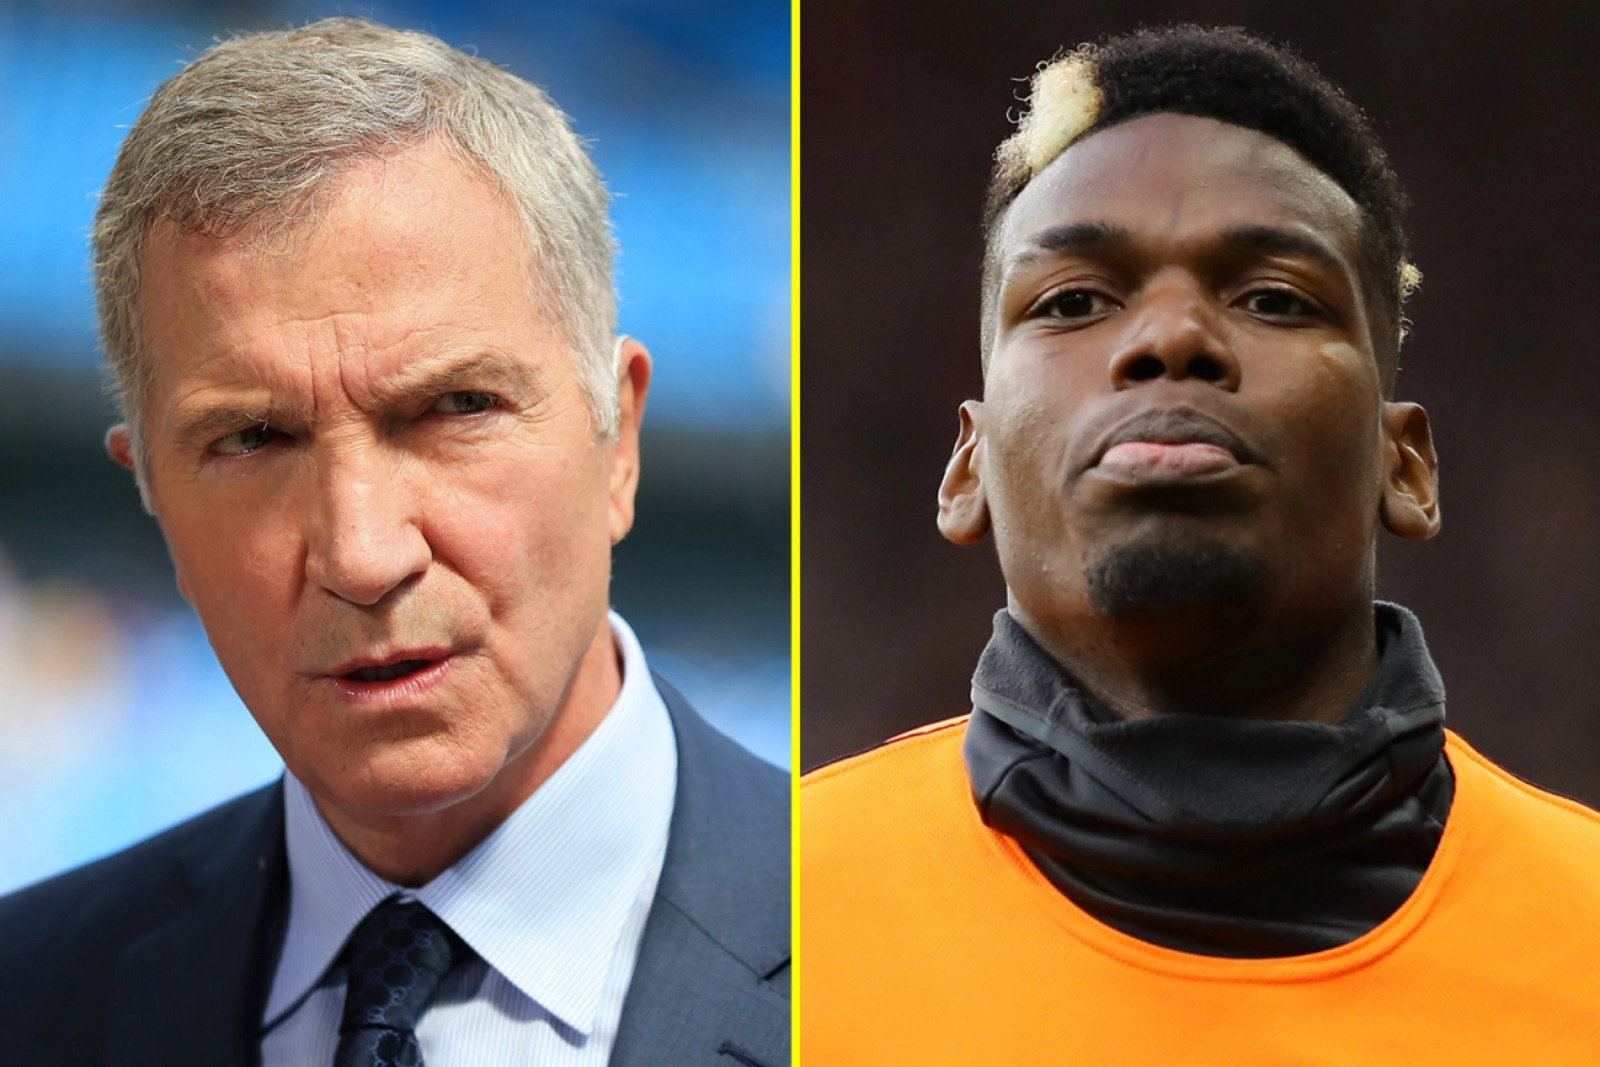 Souness Still Finds Room for Improvement in Pogba as Manchester United Midfielder